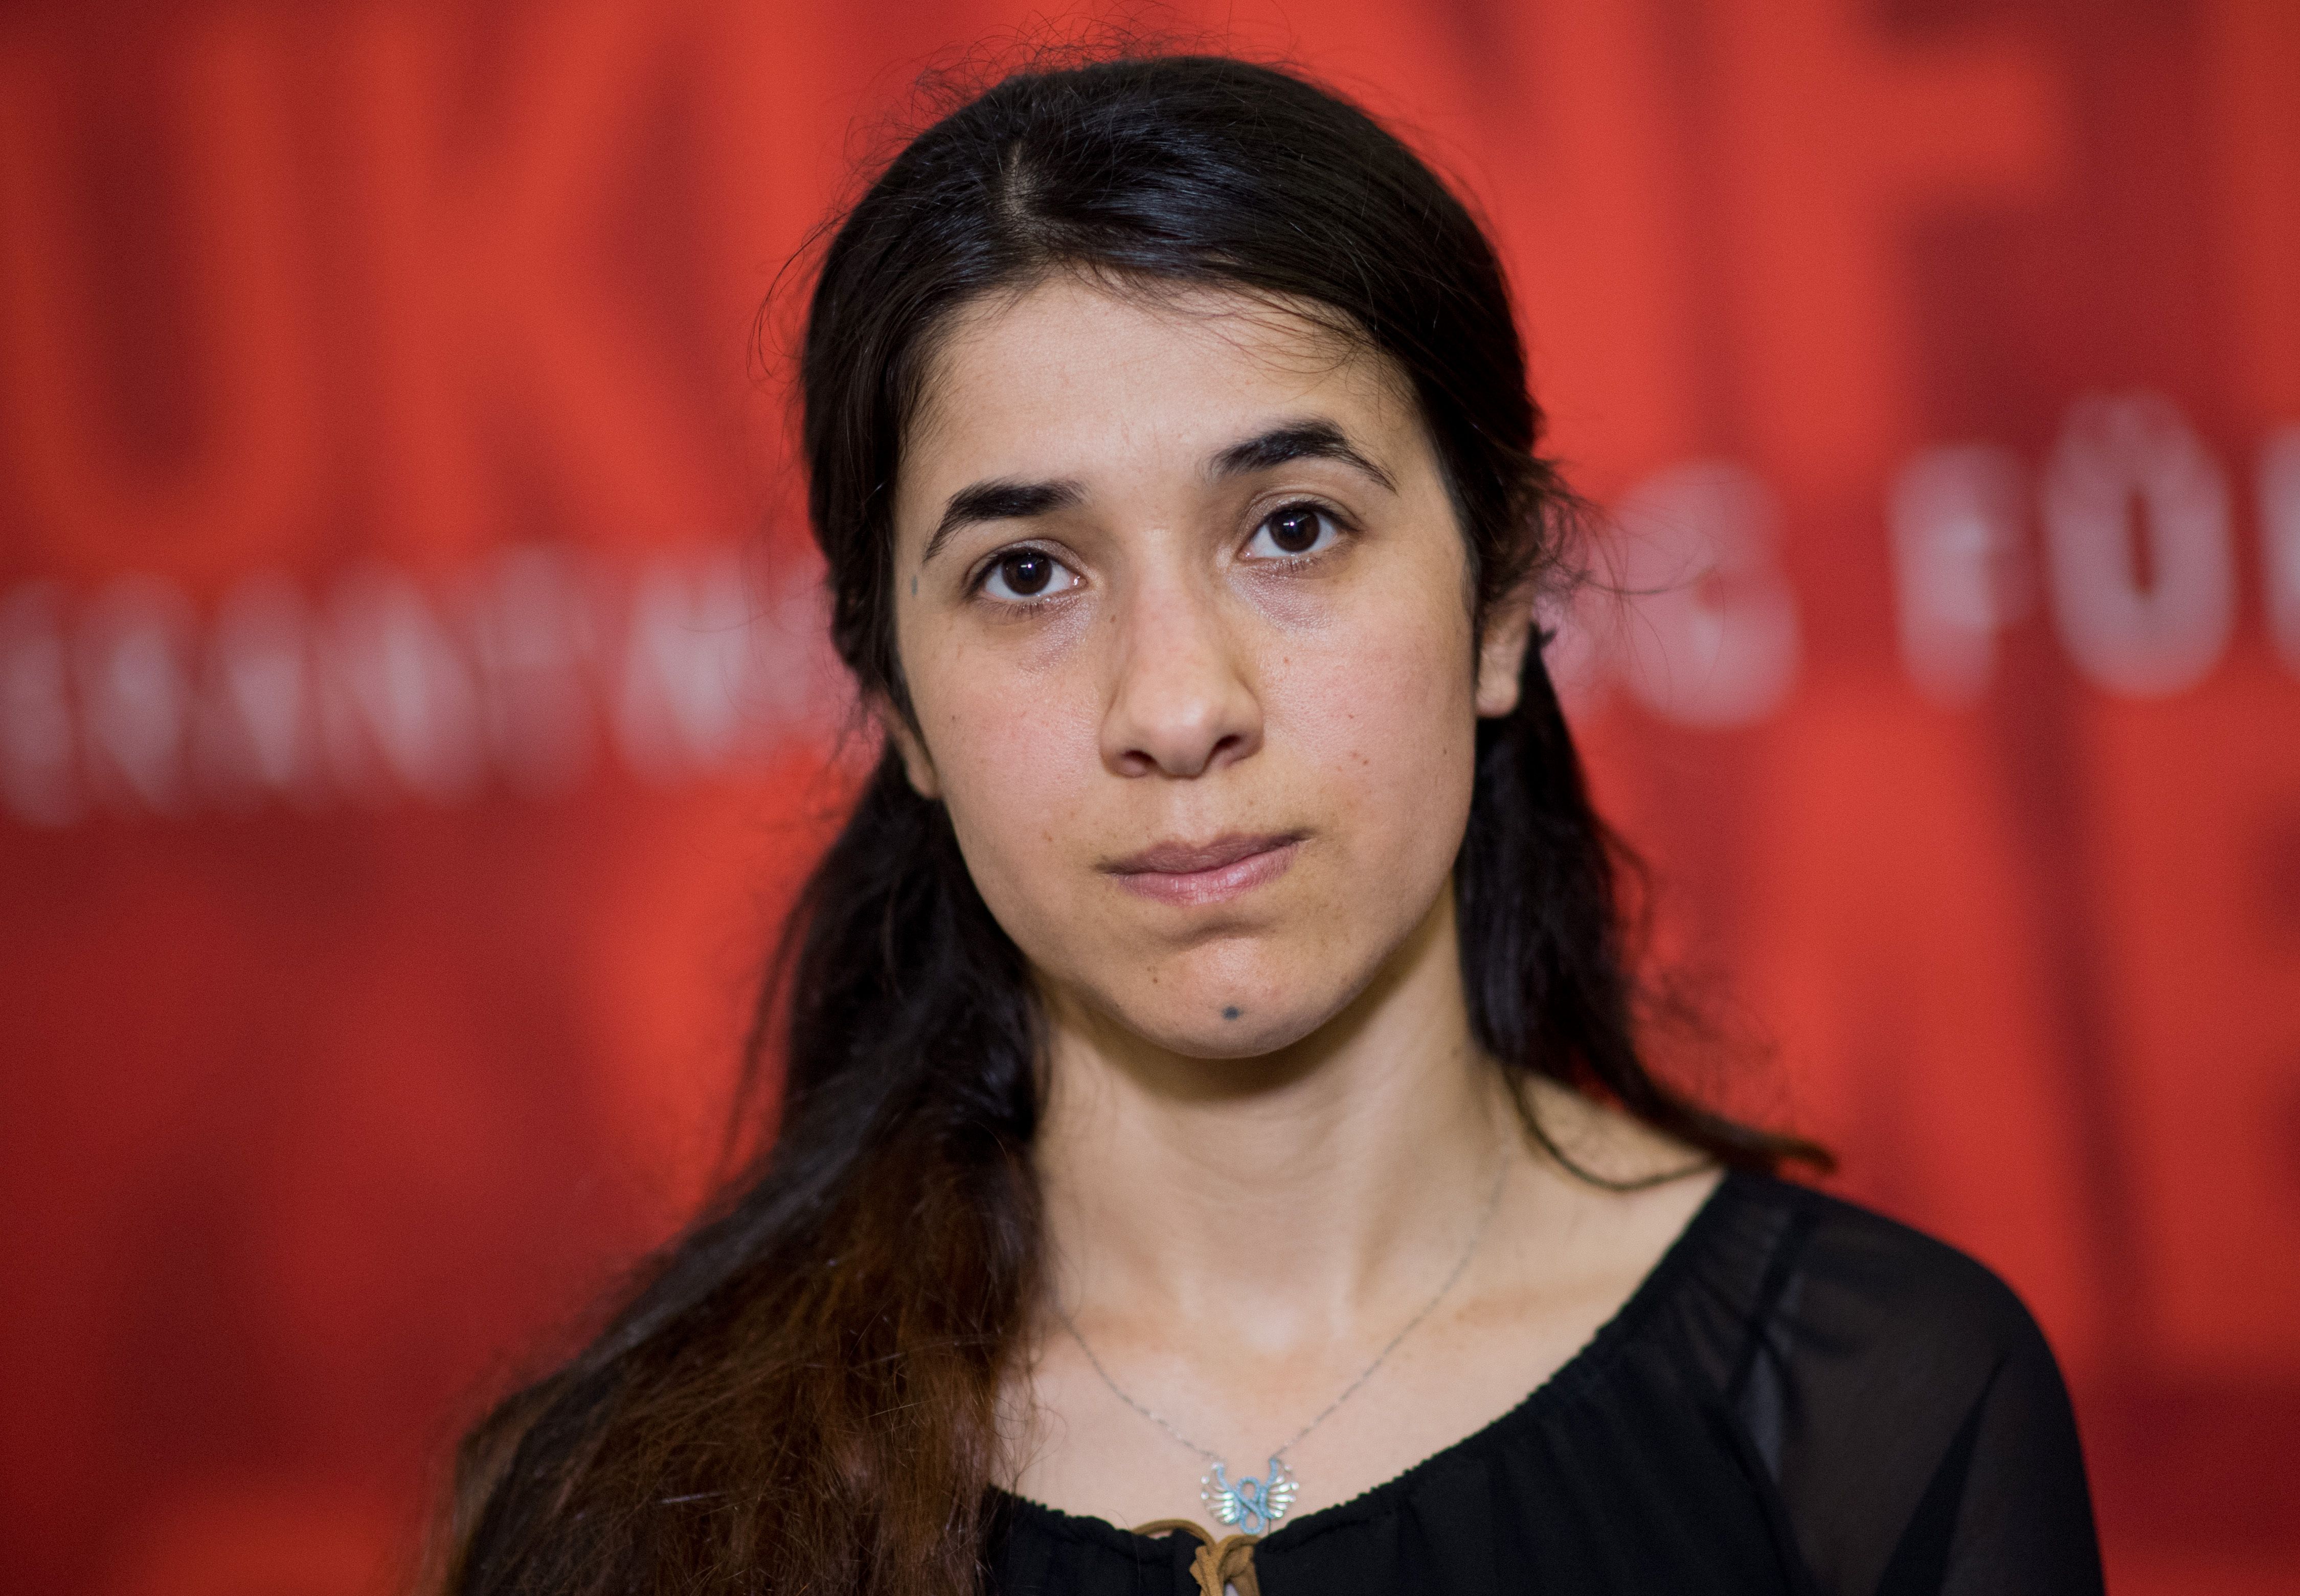 Nadia Murad participates in the Lower Saxony Landtag in Hanover, northern Germany on May 31, 2016 (Julian Stratenschulte—AFP/Getty Images)